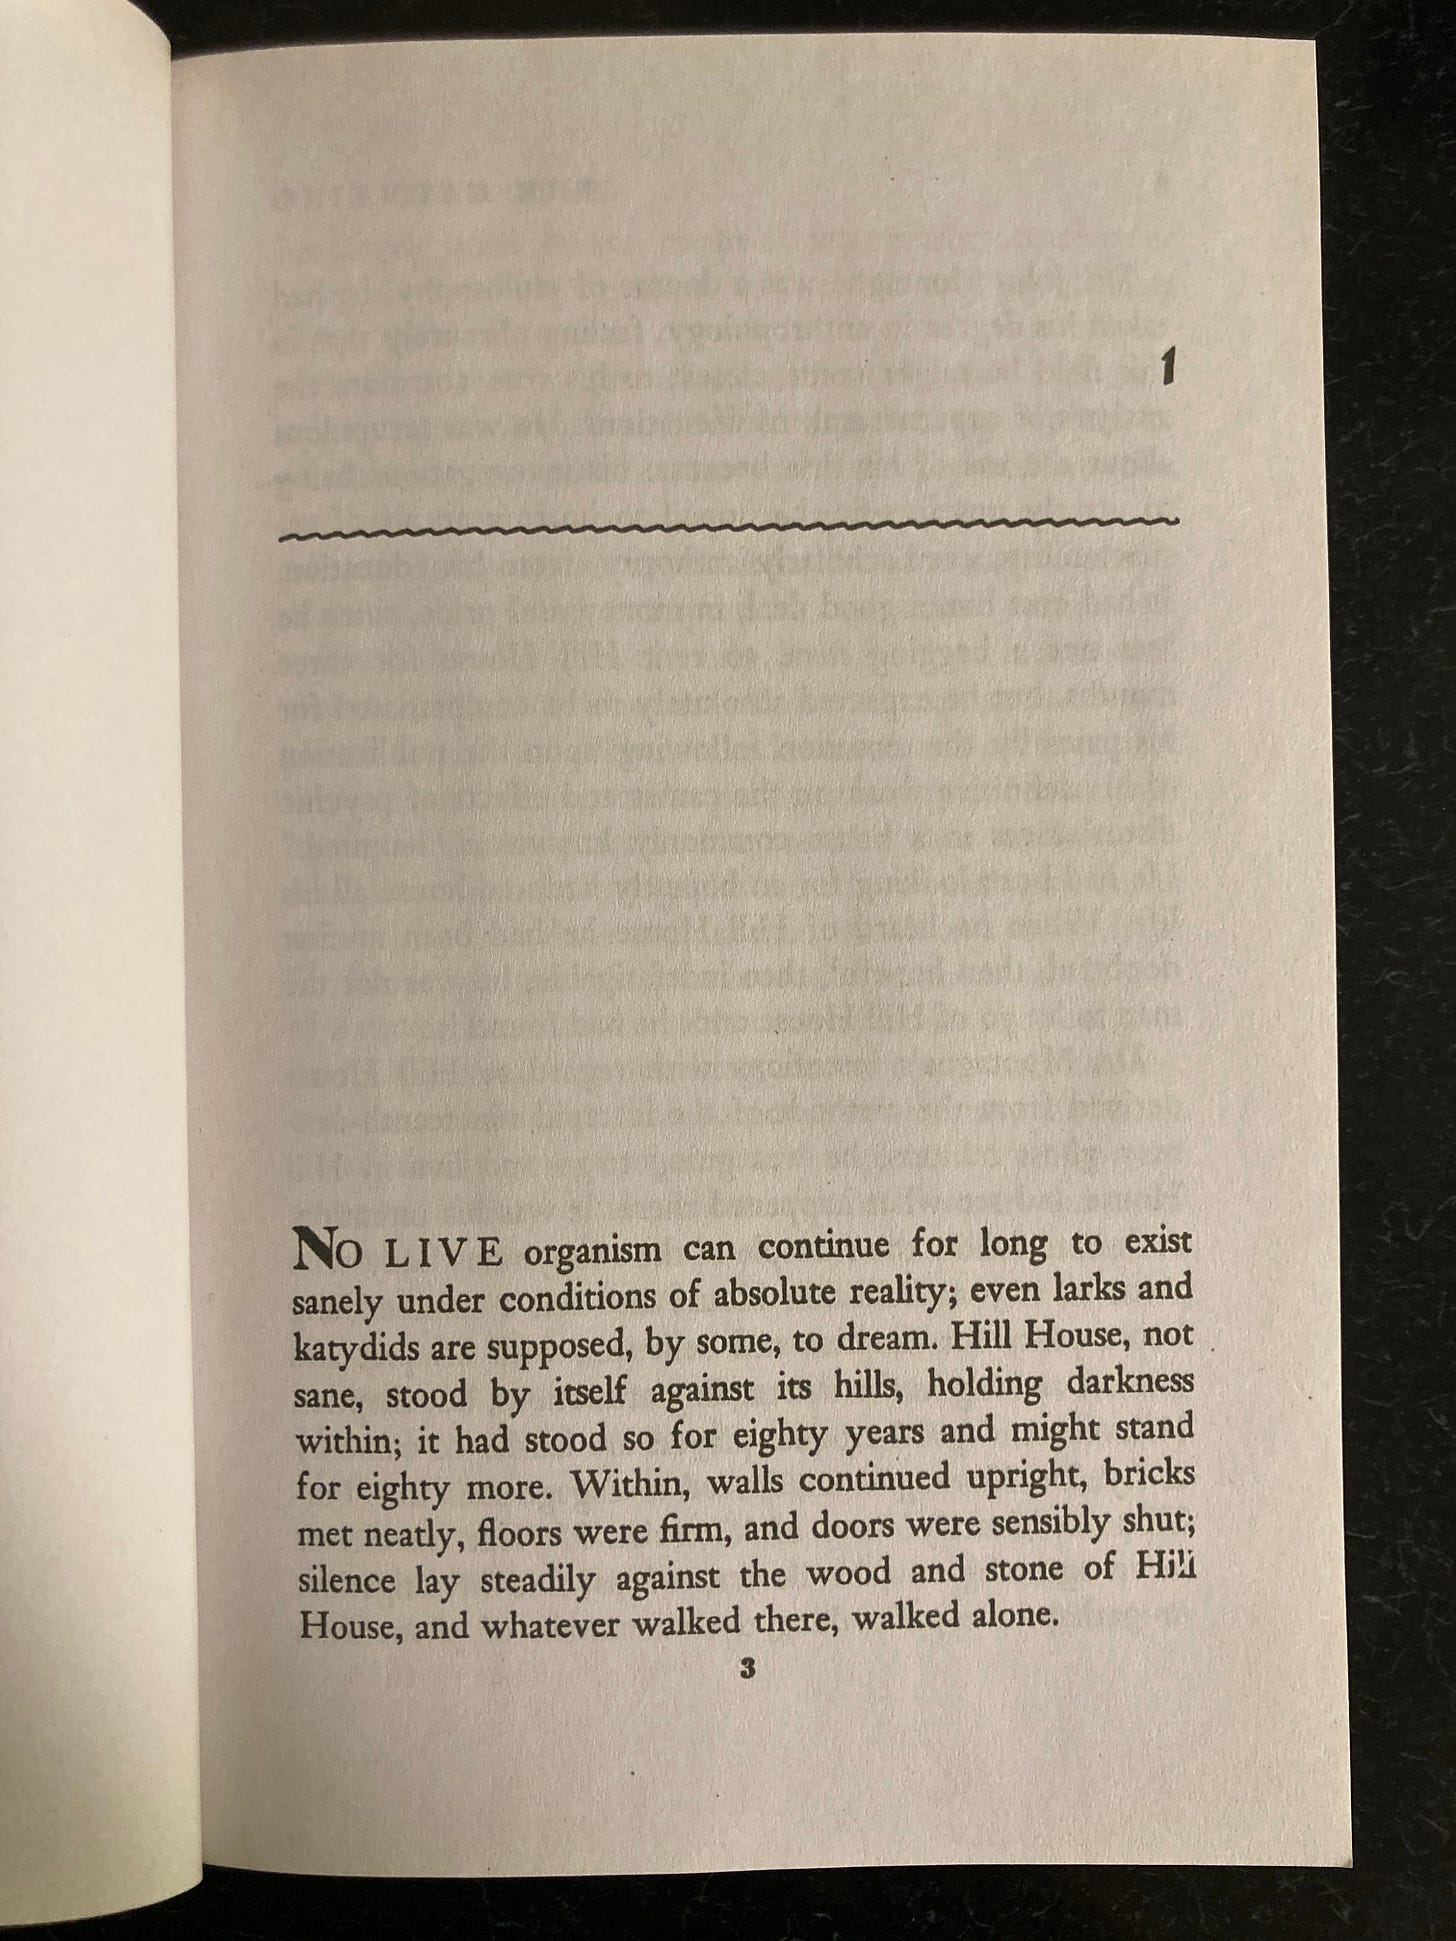 Photo of the first paragraph of Shirley Jackson's The Haunting of Hill House